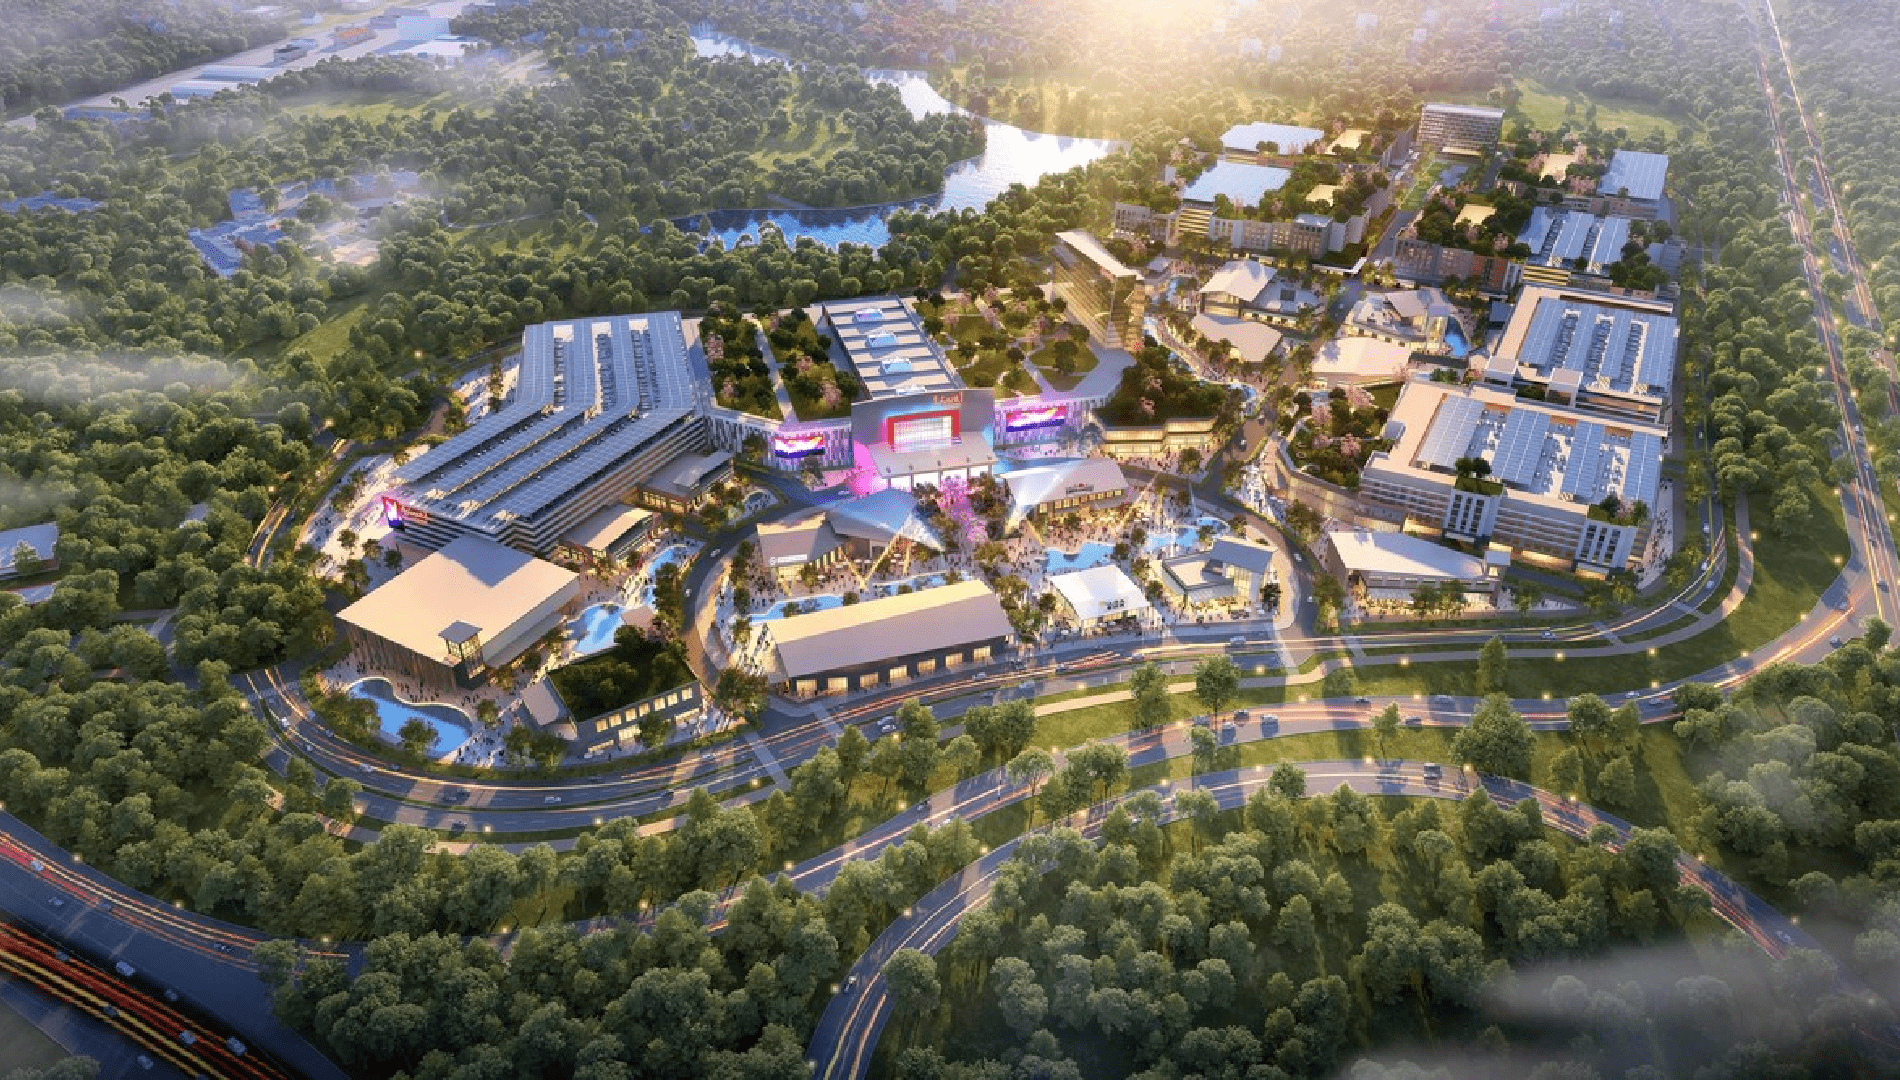 Cordish Unveils Revamped $1.4B Mixed-Use Development and Casino for Petersburg